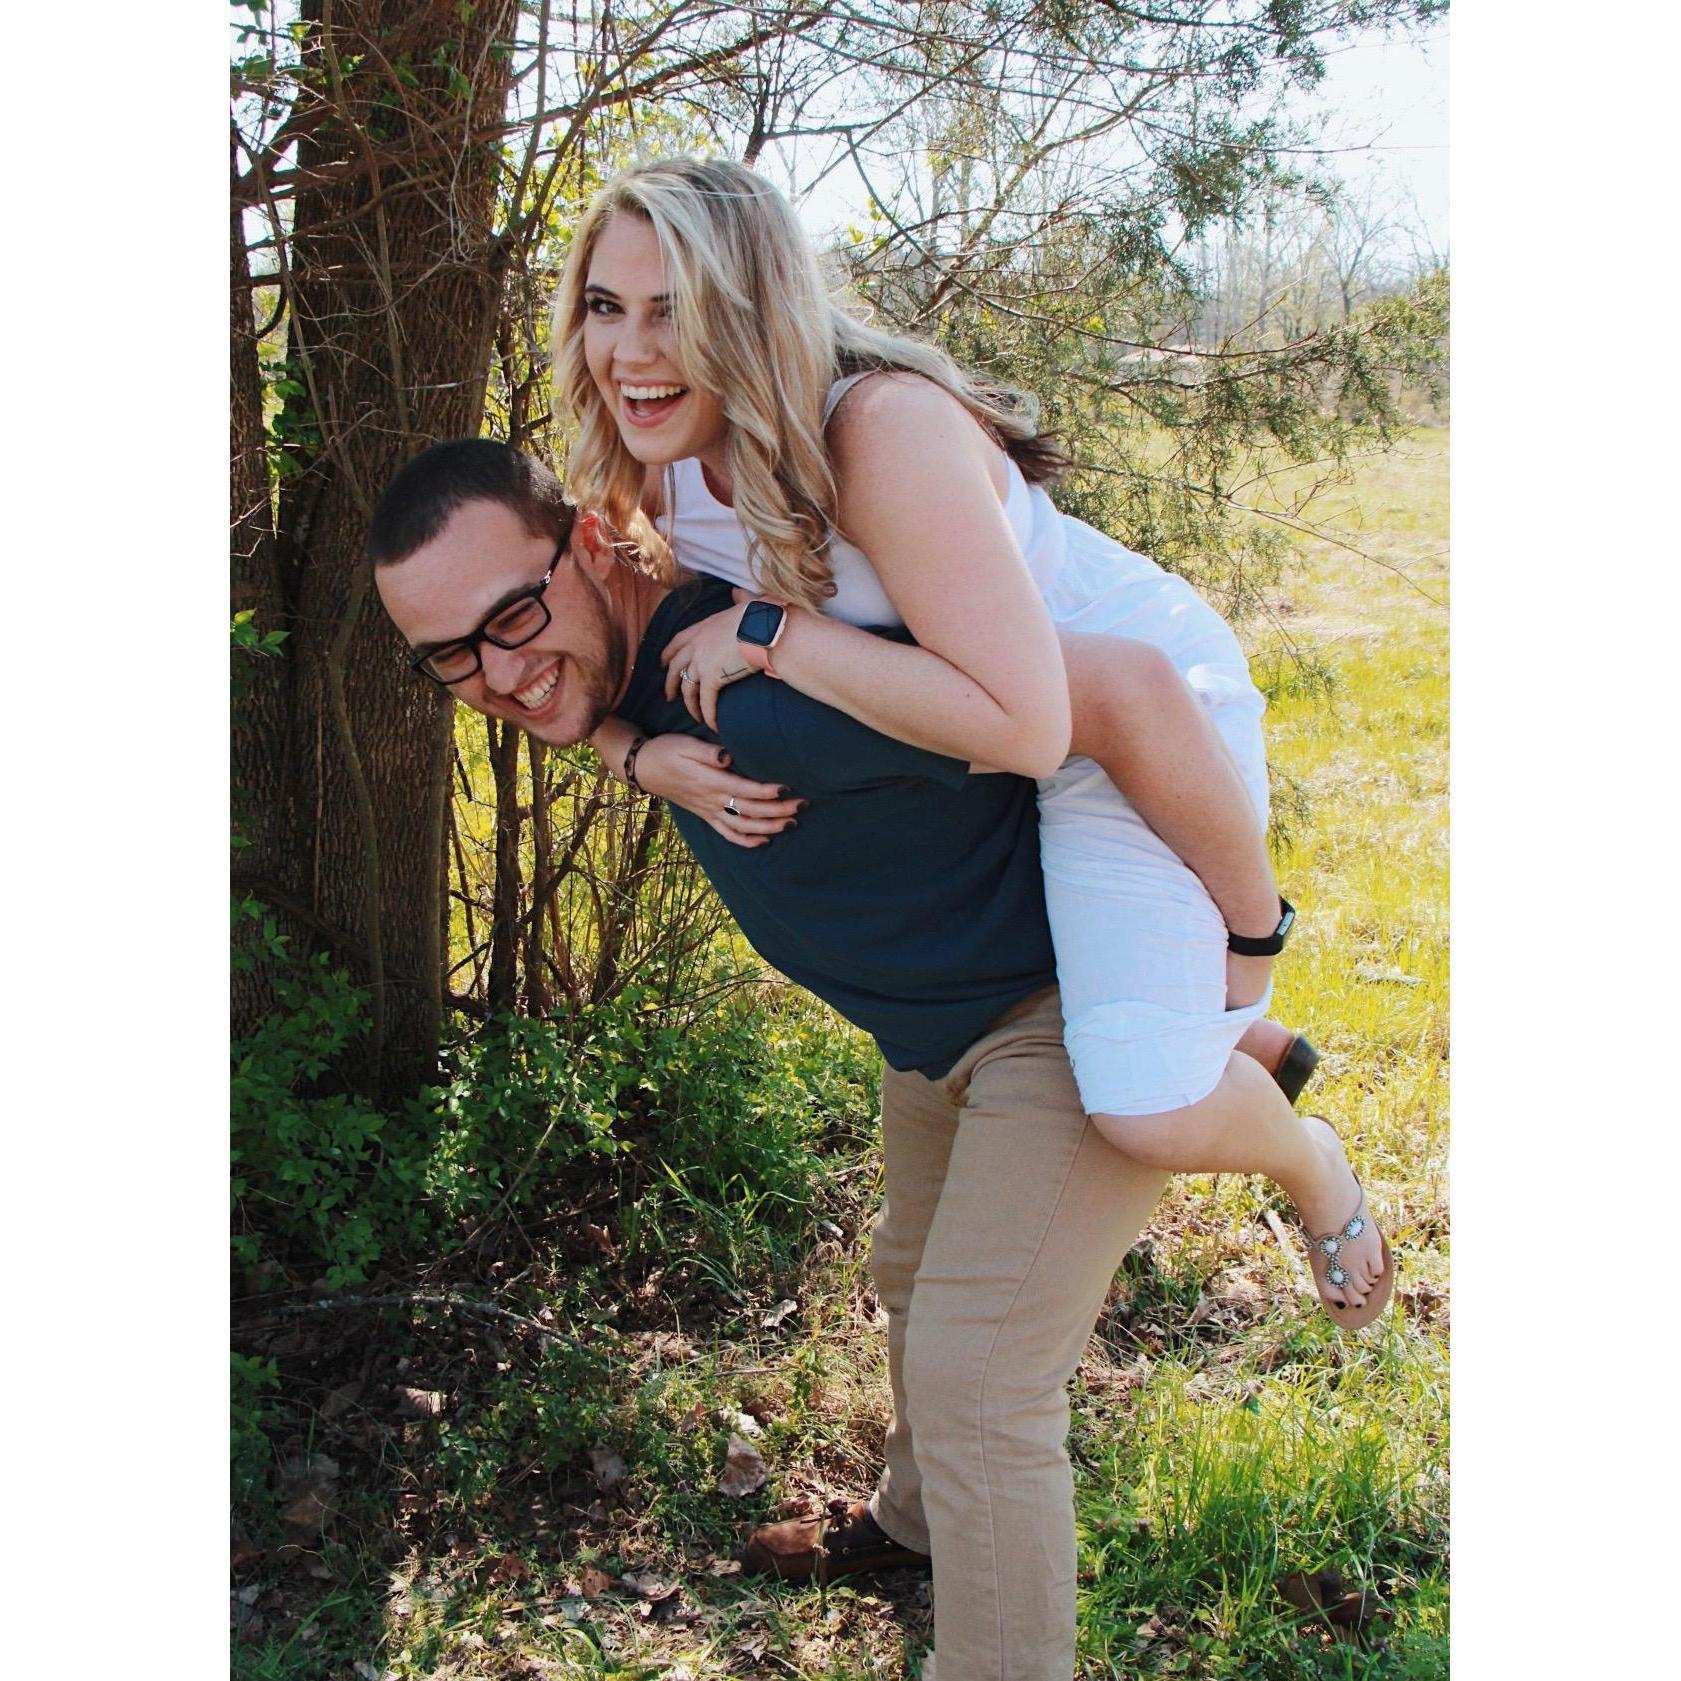 Piggy back rides are hard in maxi dresses! Just ask us!